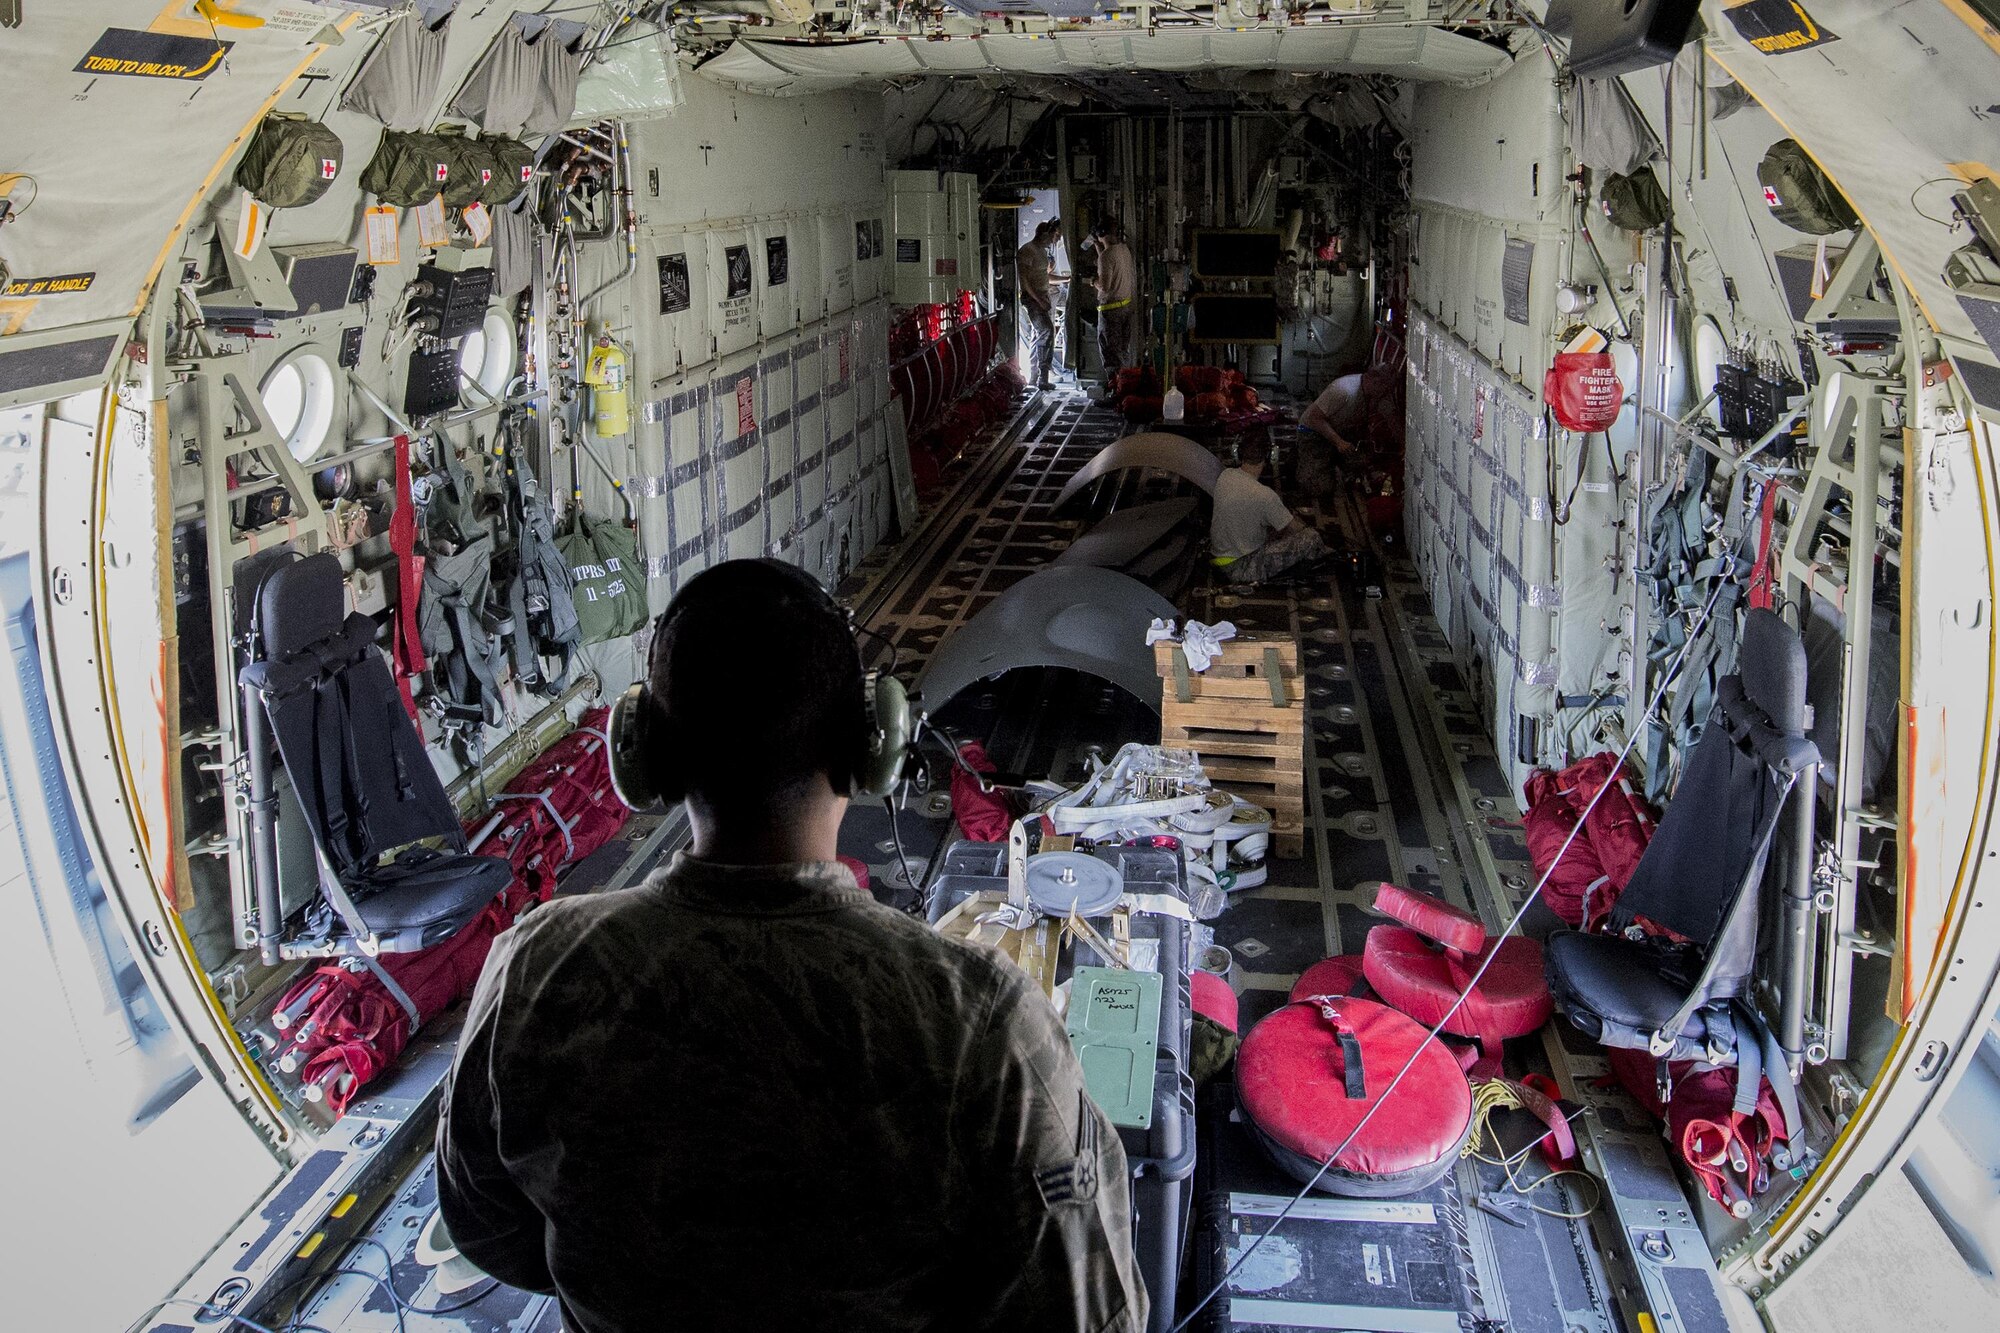 U.S. Air Force Airmen from the 23d Equipment Maintenance Squadron perform system test checks inside an HC-130J Combat King II during an isochronal inspection, May 31, 2016, at Moody Air Force Base, Ga. During an ISO inspection, Airmen perform examinations and maintenance to the entire airframe to increase the overall performance and safety. (U.S. Air Force photo by Airman Daniel Snider/Released)